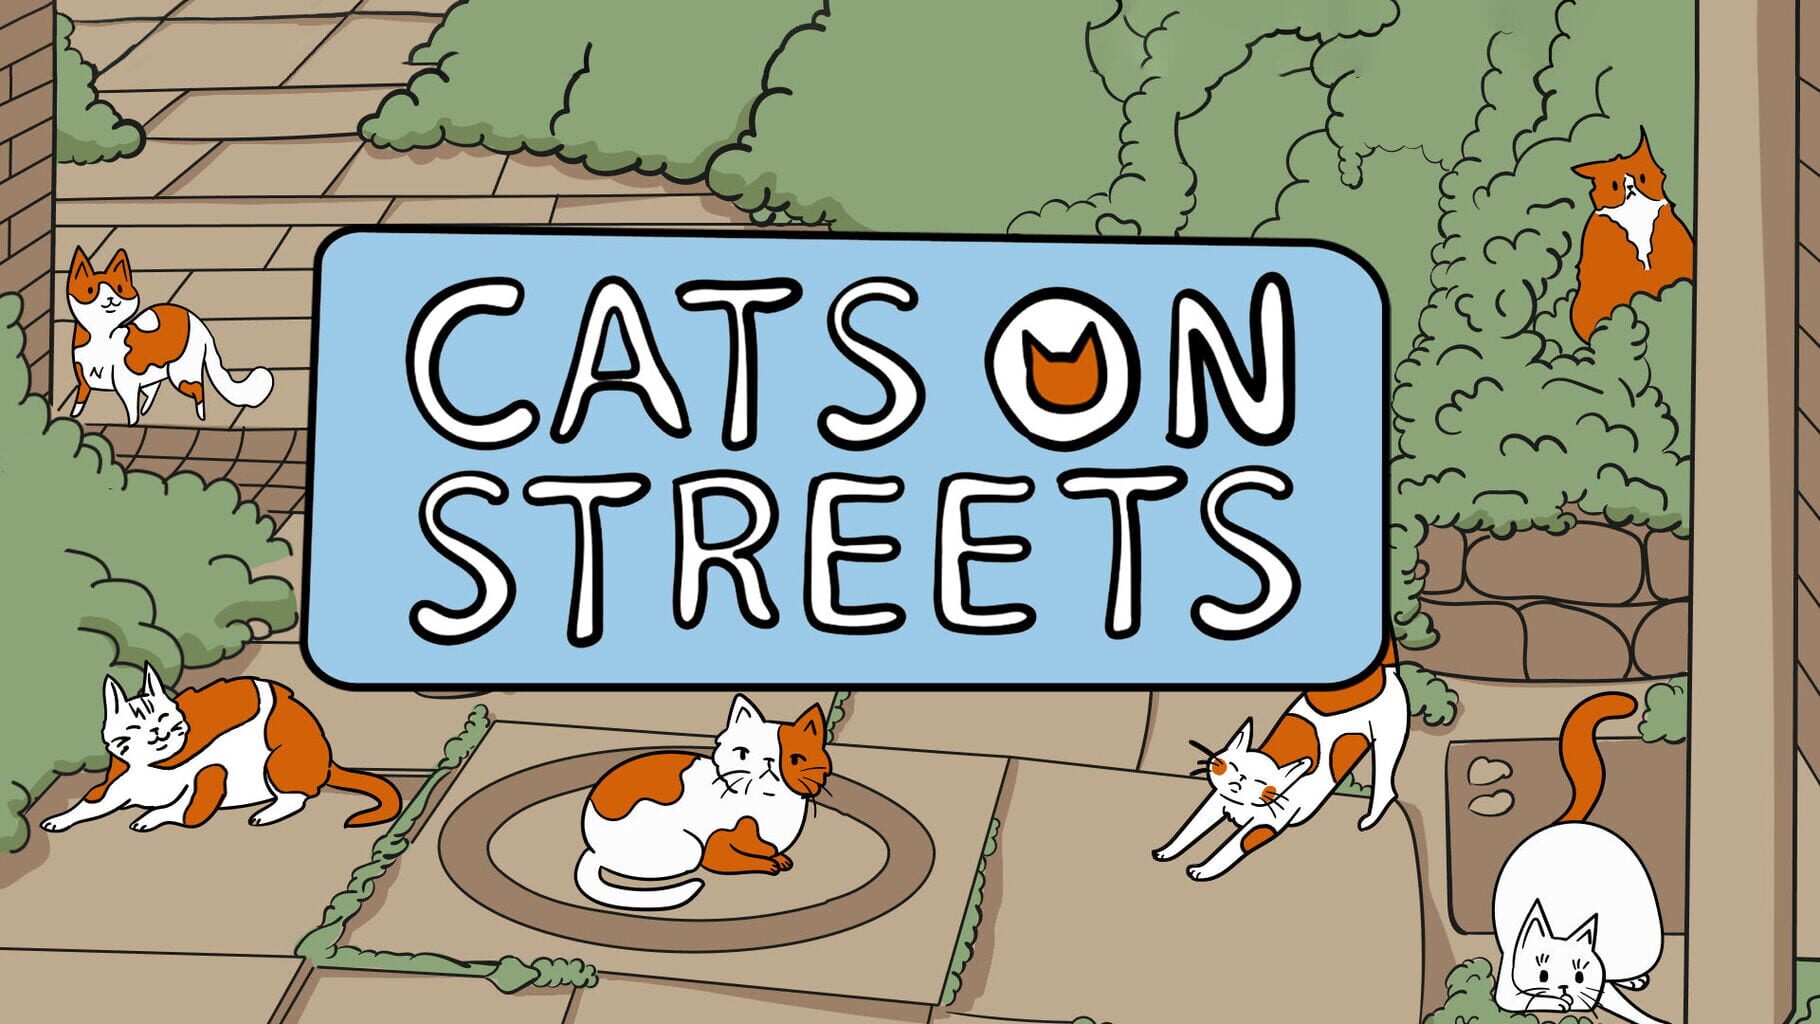 Cats on Streets artwork